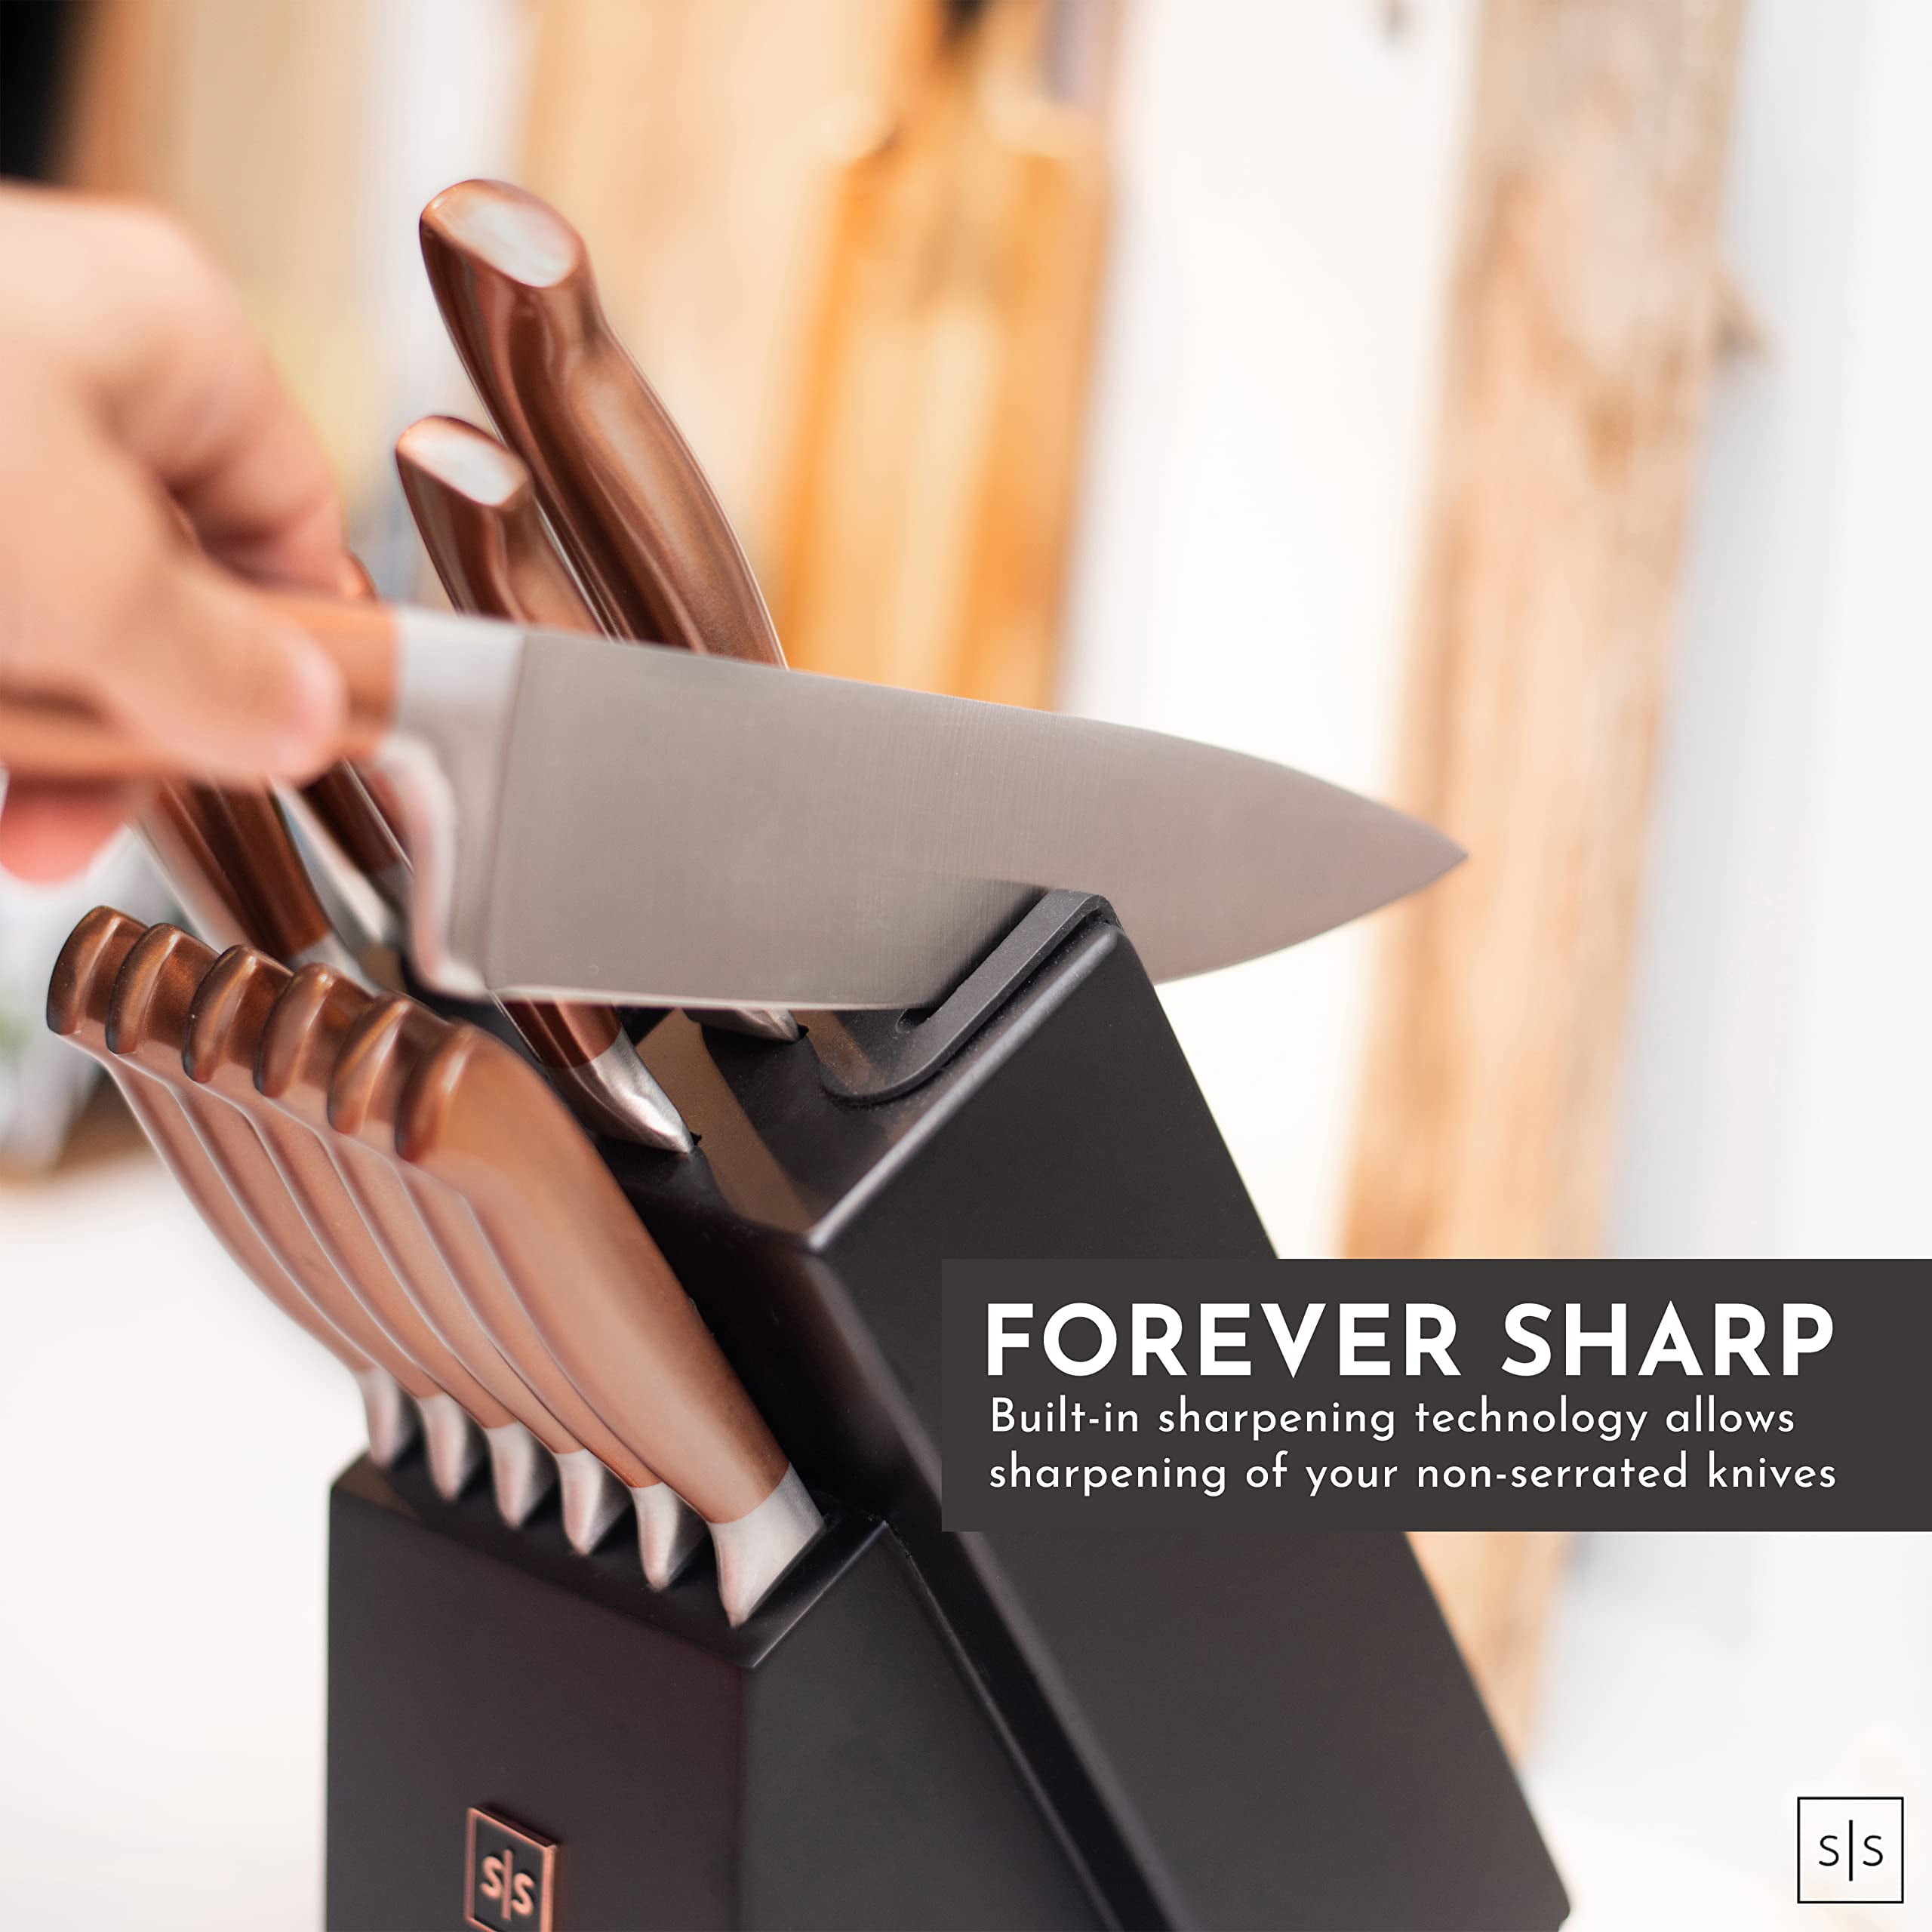 Copper Knife Set with Block - 14 PC Self Sharpening Knife Block Set - Rose  Gold Knife Set & Black Knife Block with Sharpener - Copper Kitchen